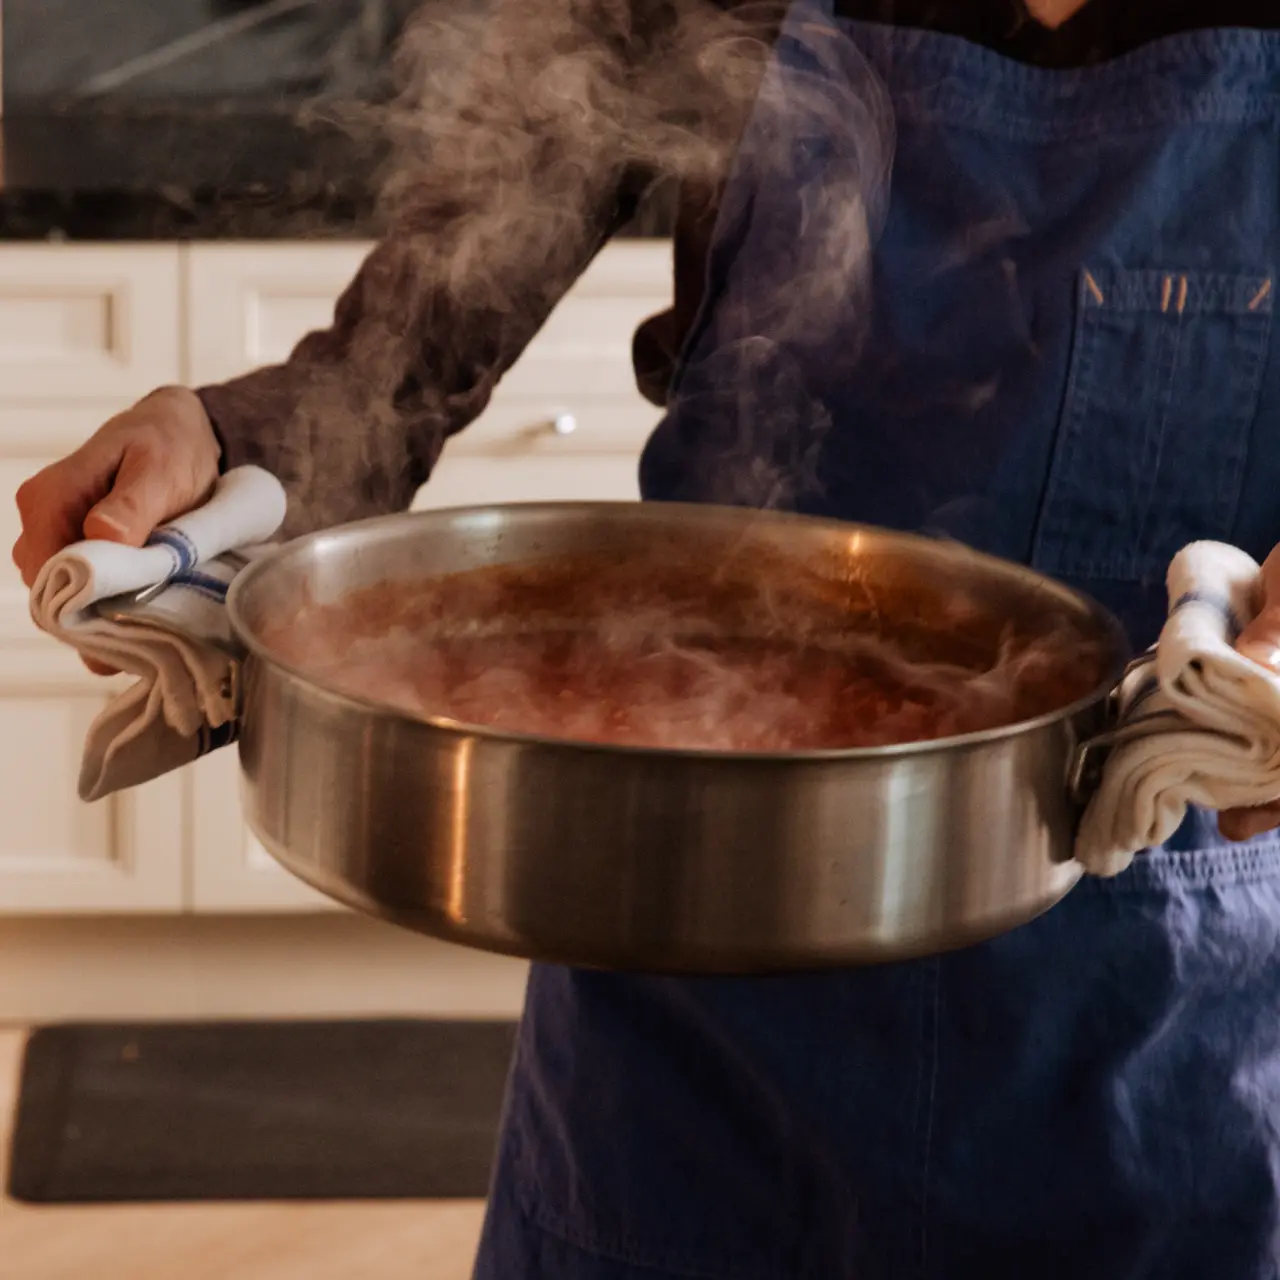 A person wearing an apron holds a steaming pot with both hands using oven mitts.